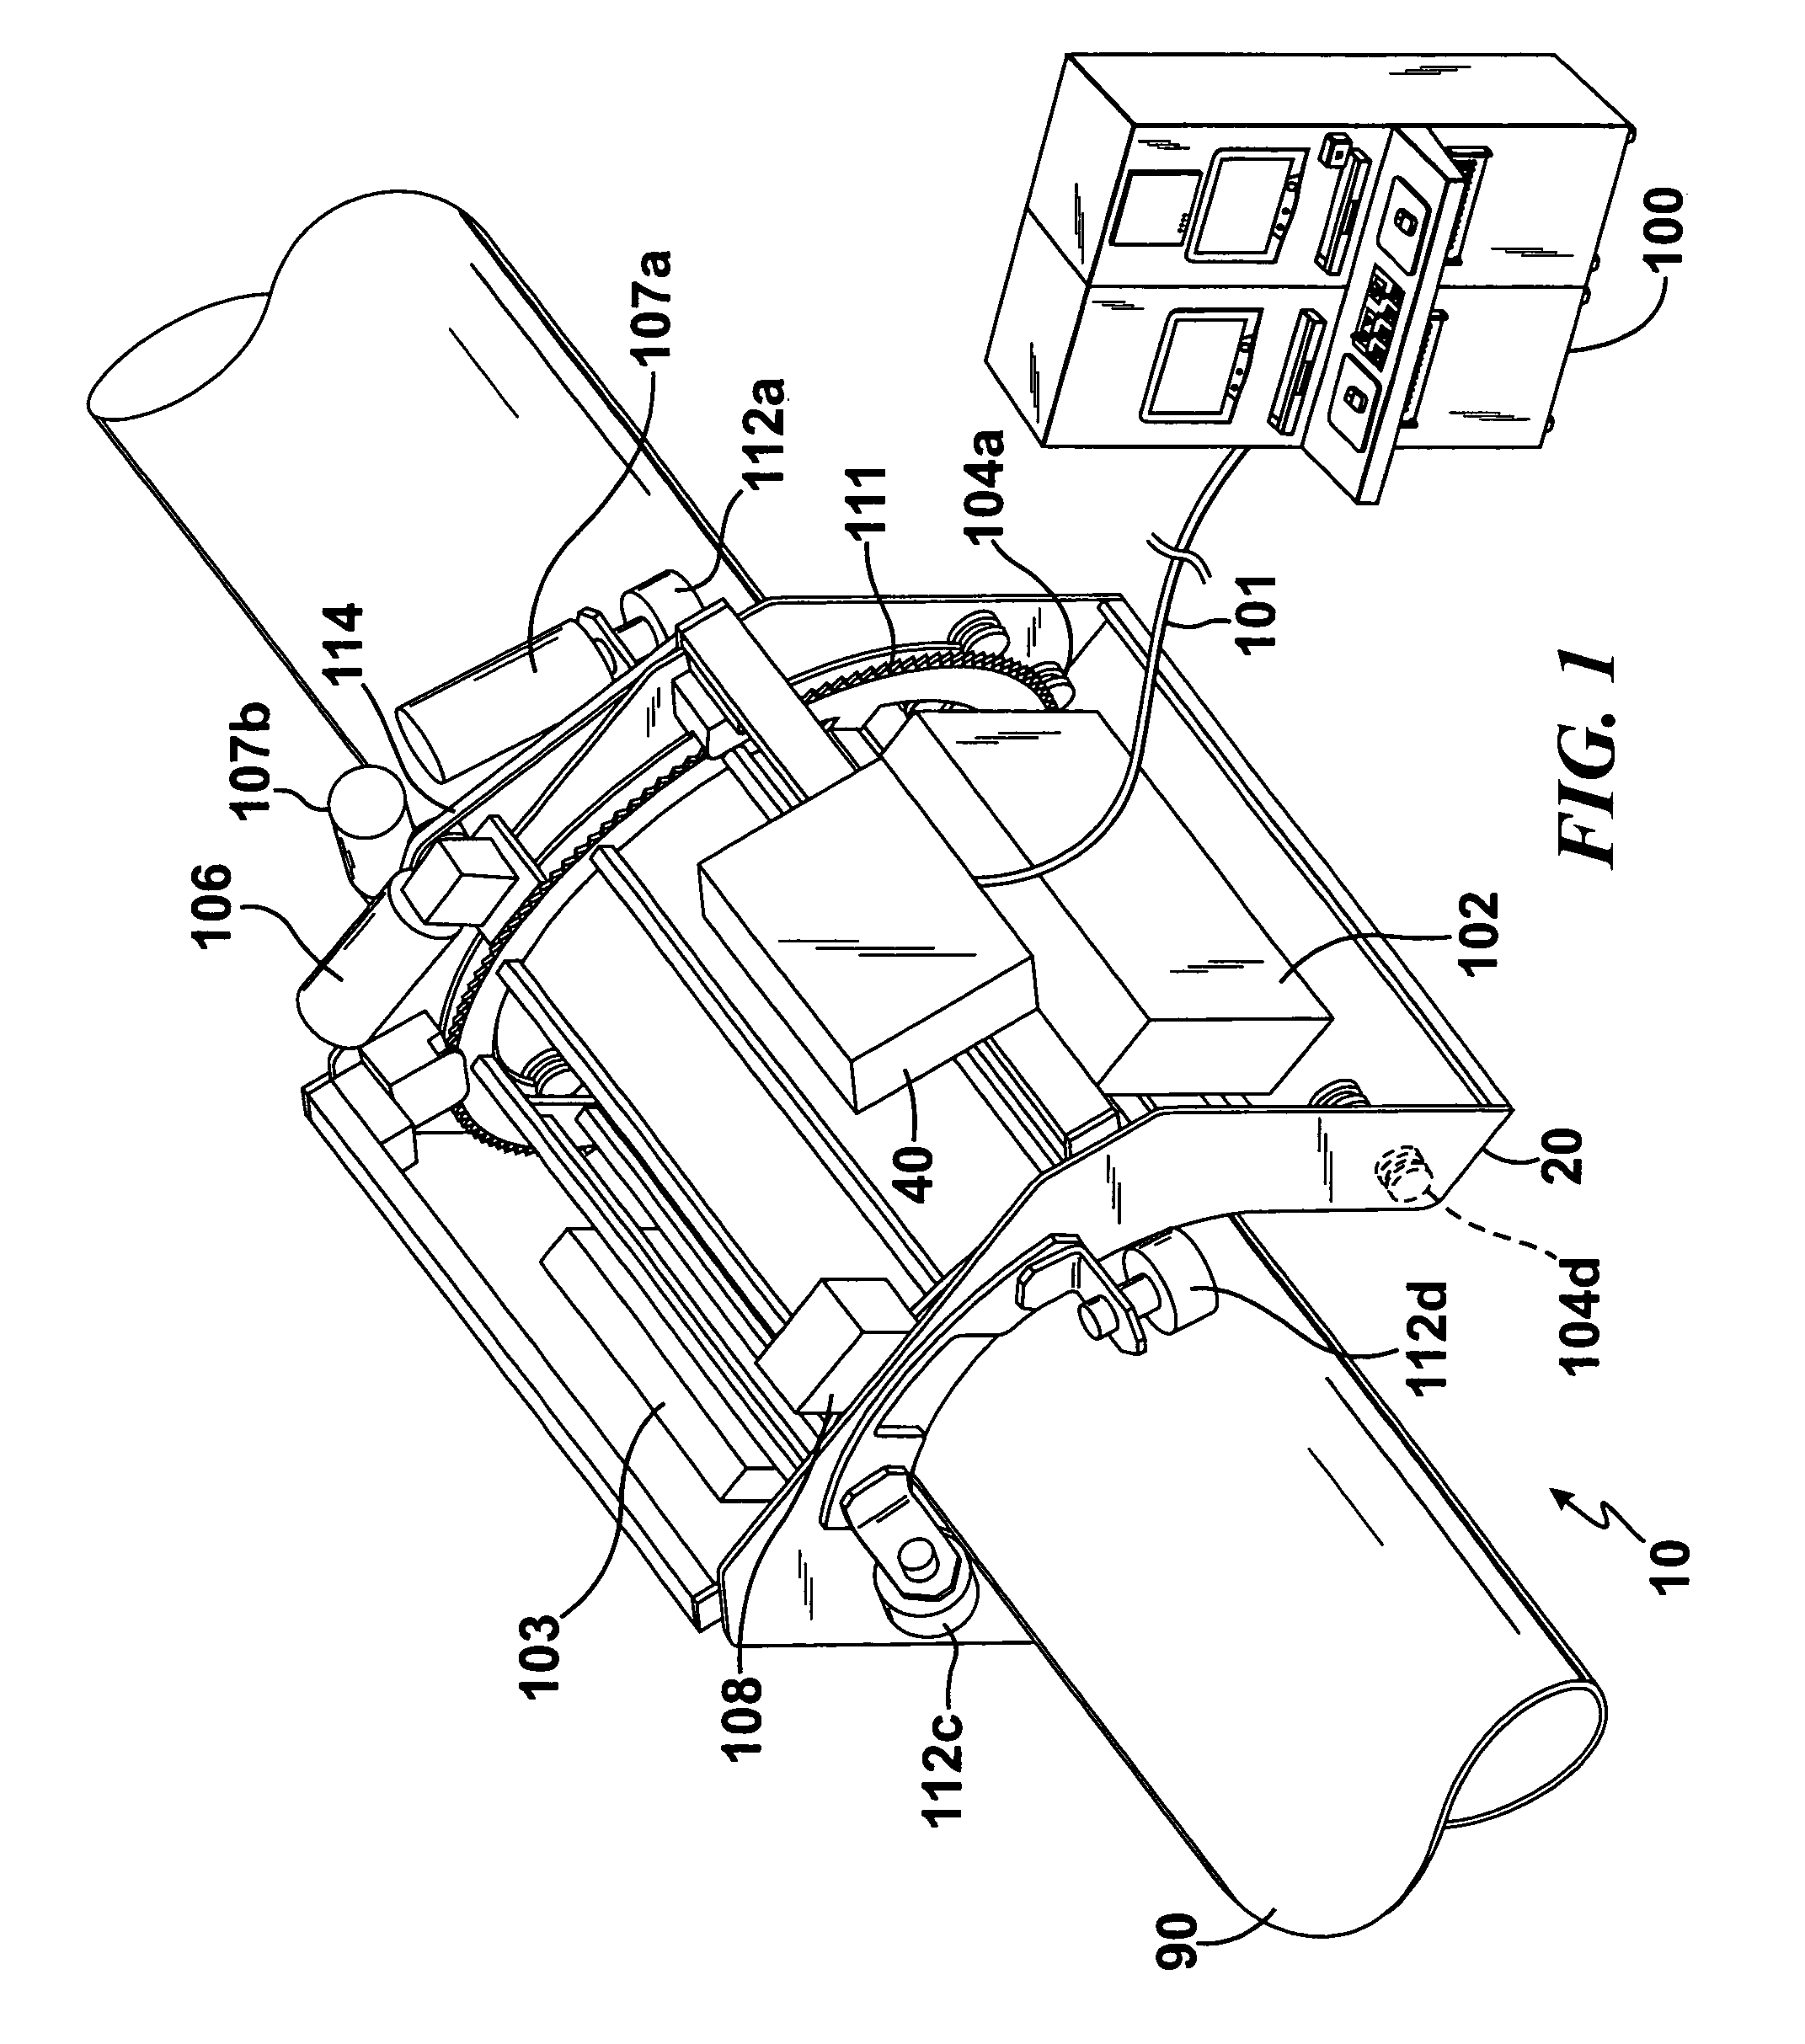 Method and apparatus for automated, digital, radiographic inspection of piping